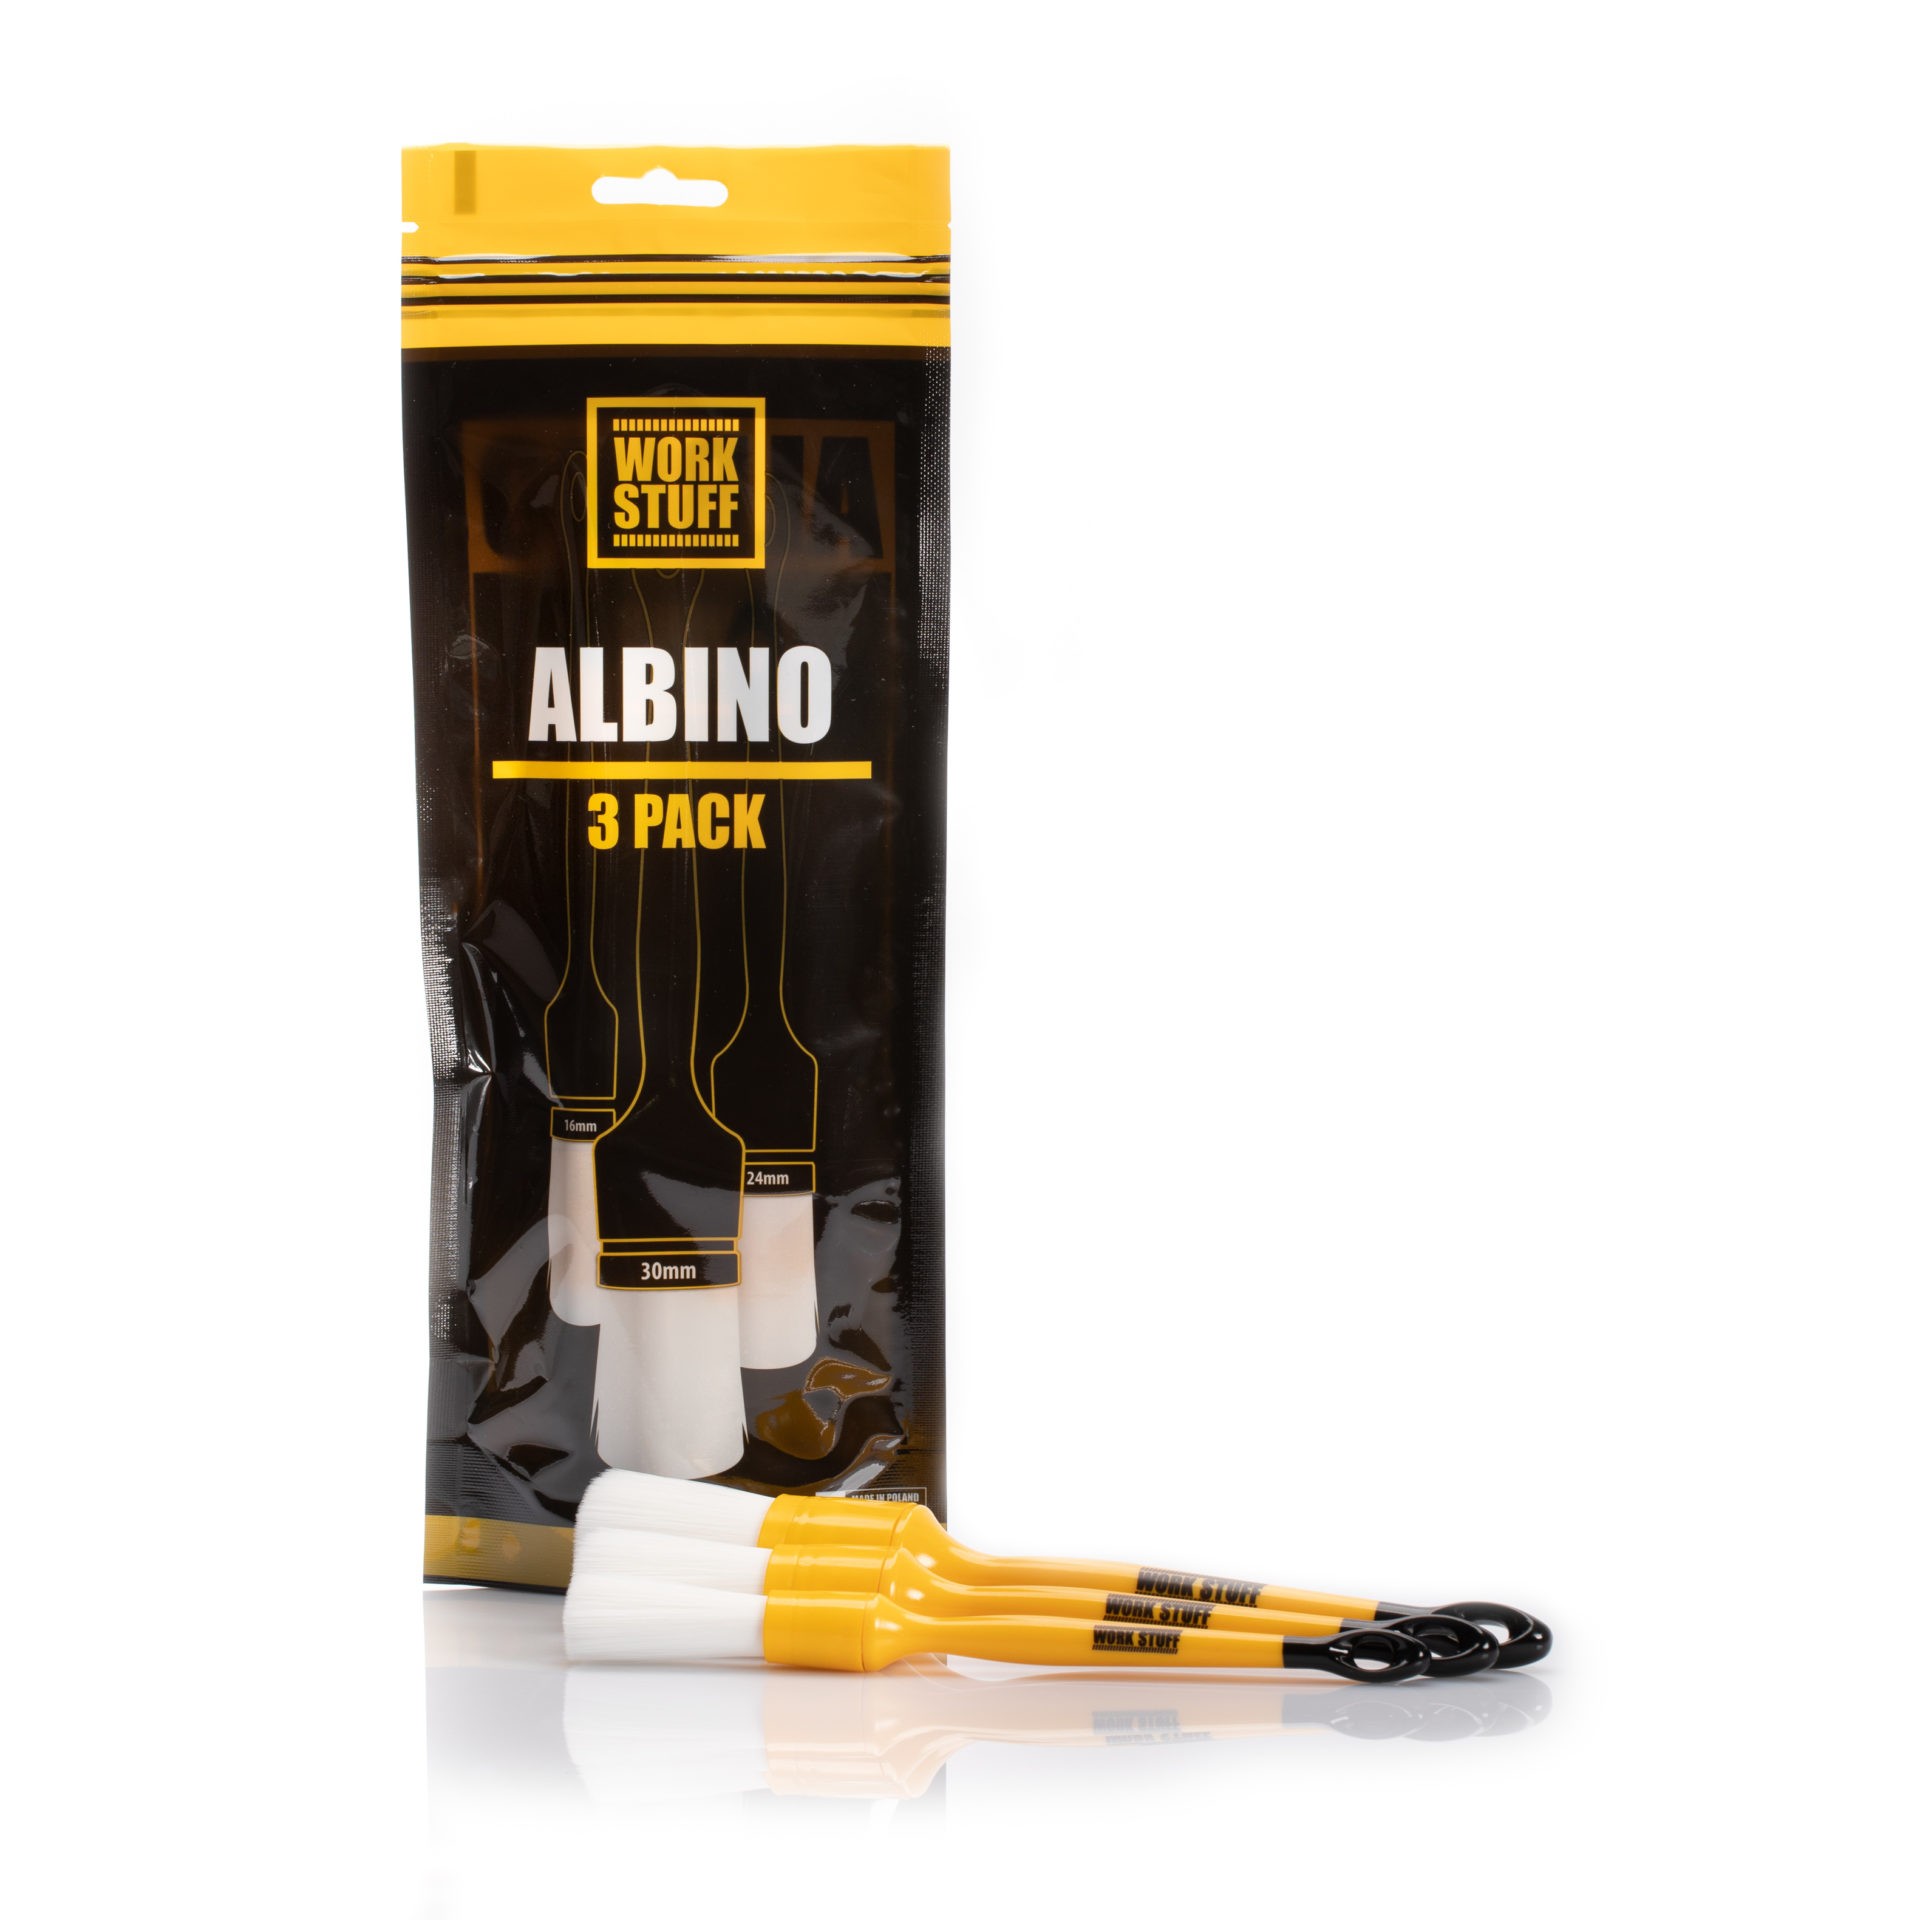 Achieve a gentle, yet effective clean with the Work Stuff Detailing Brush ALBINO 3-pack set. These highly delicate brushes are perfect for prewash, and are suitable for use on delicate car interior works such as steering wheel cleaning or leather decor.